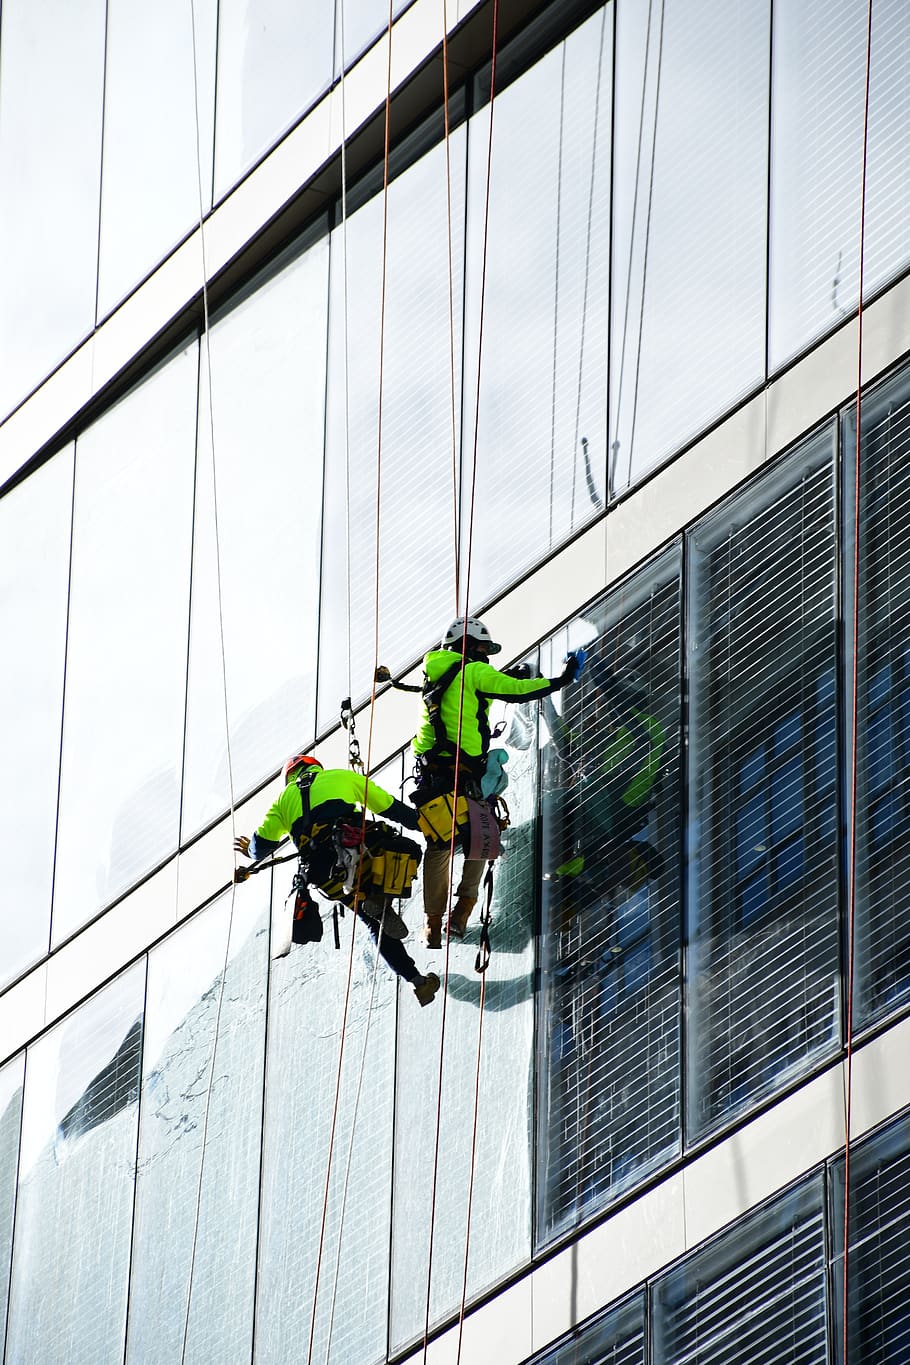 window cleaner, high rise building cleaner, building glass maintenance, architecture, built structure, building exterior, rope, low angle view, working, occupation